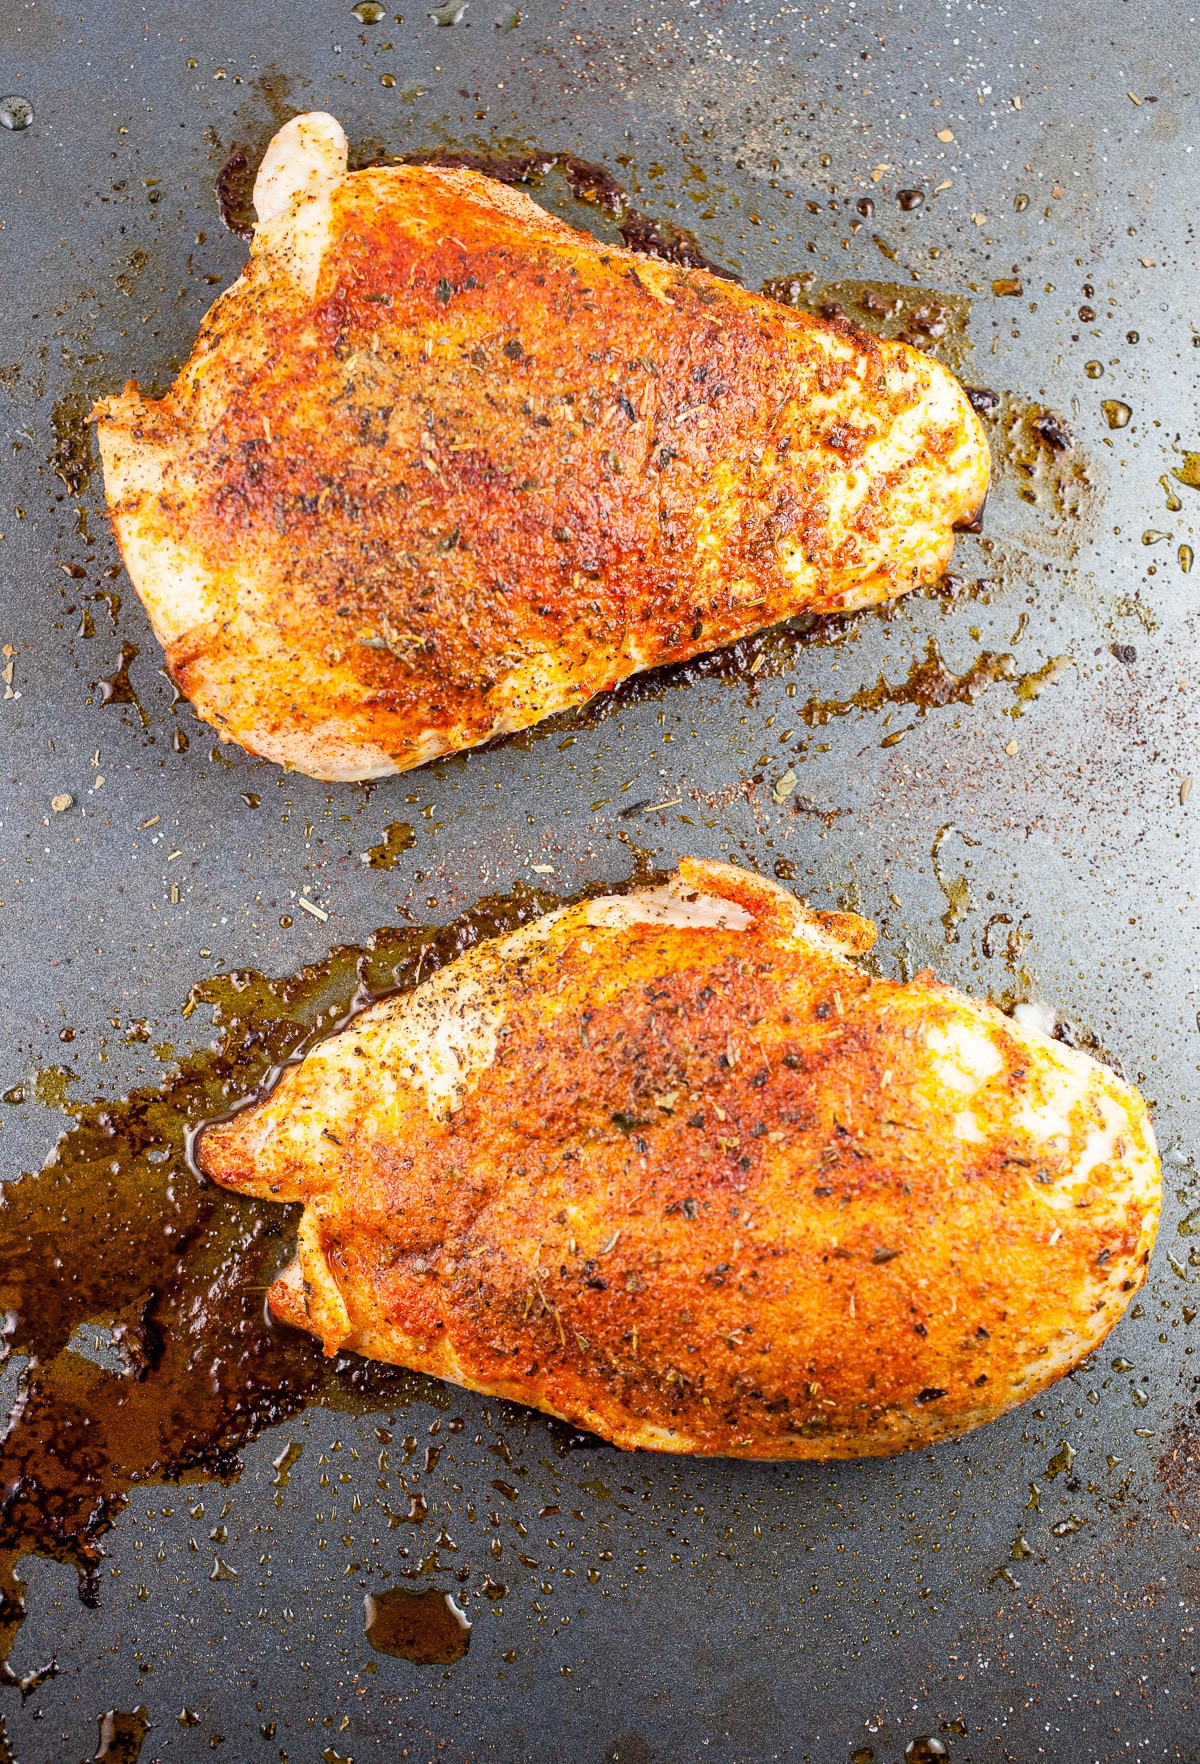 Cooked spiced chicken breasts on baking sheet.